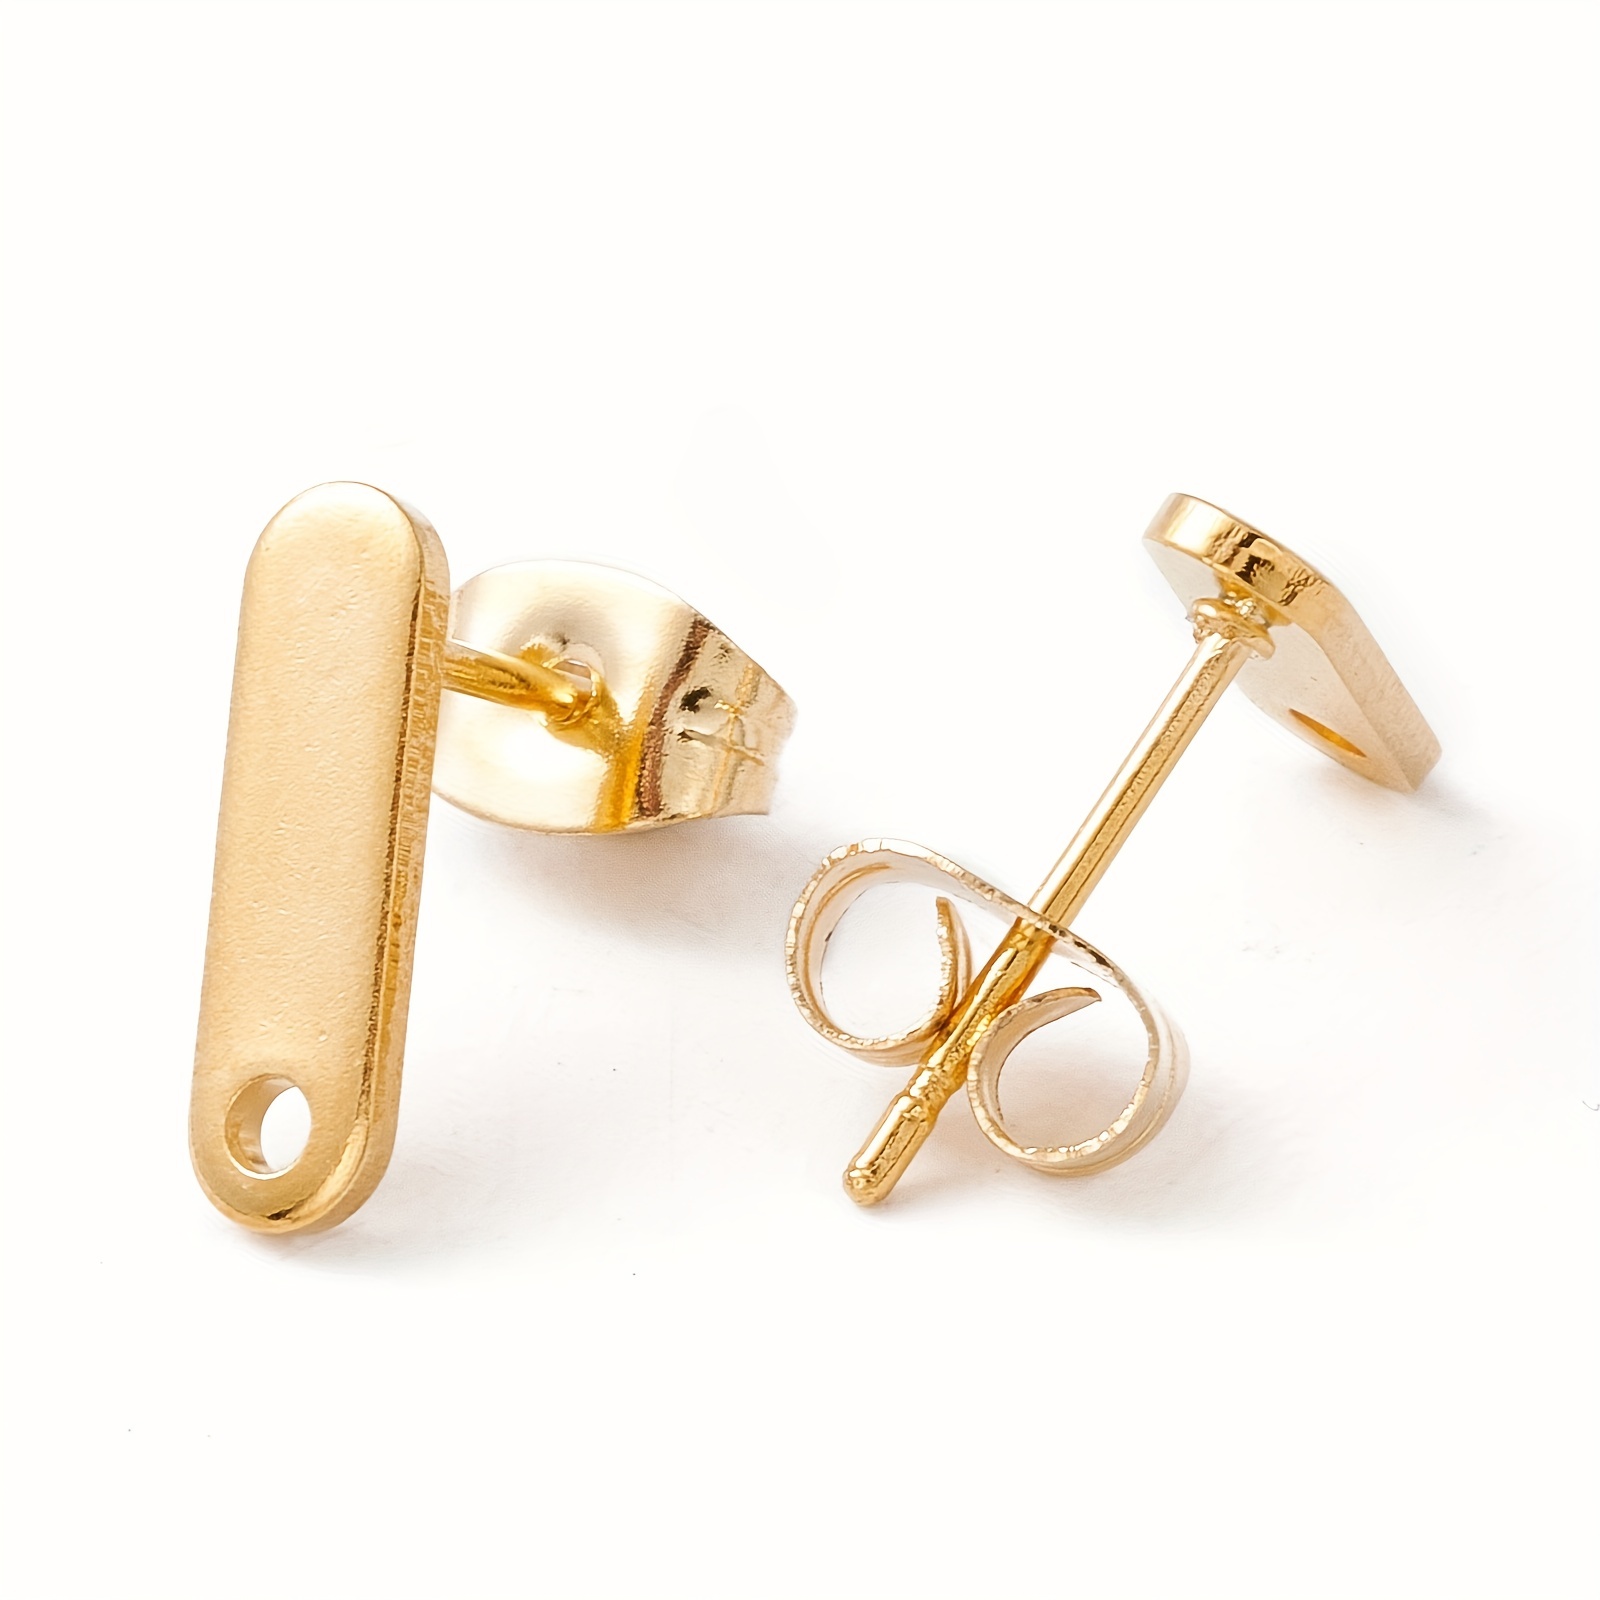 Golden Stainless Steel Stud Earring Back, Jewelry Findings for